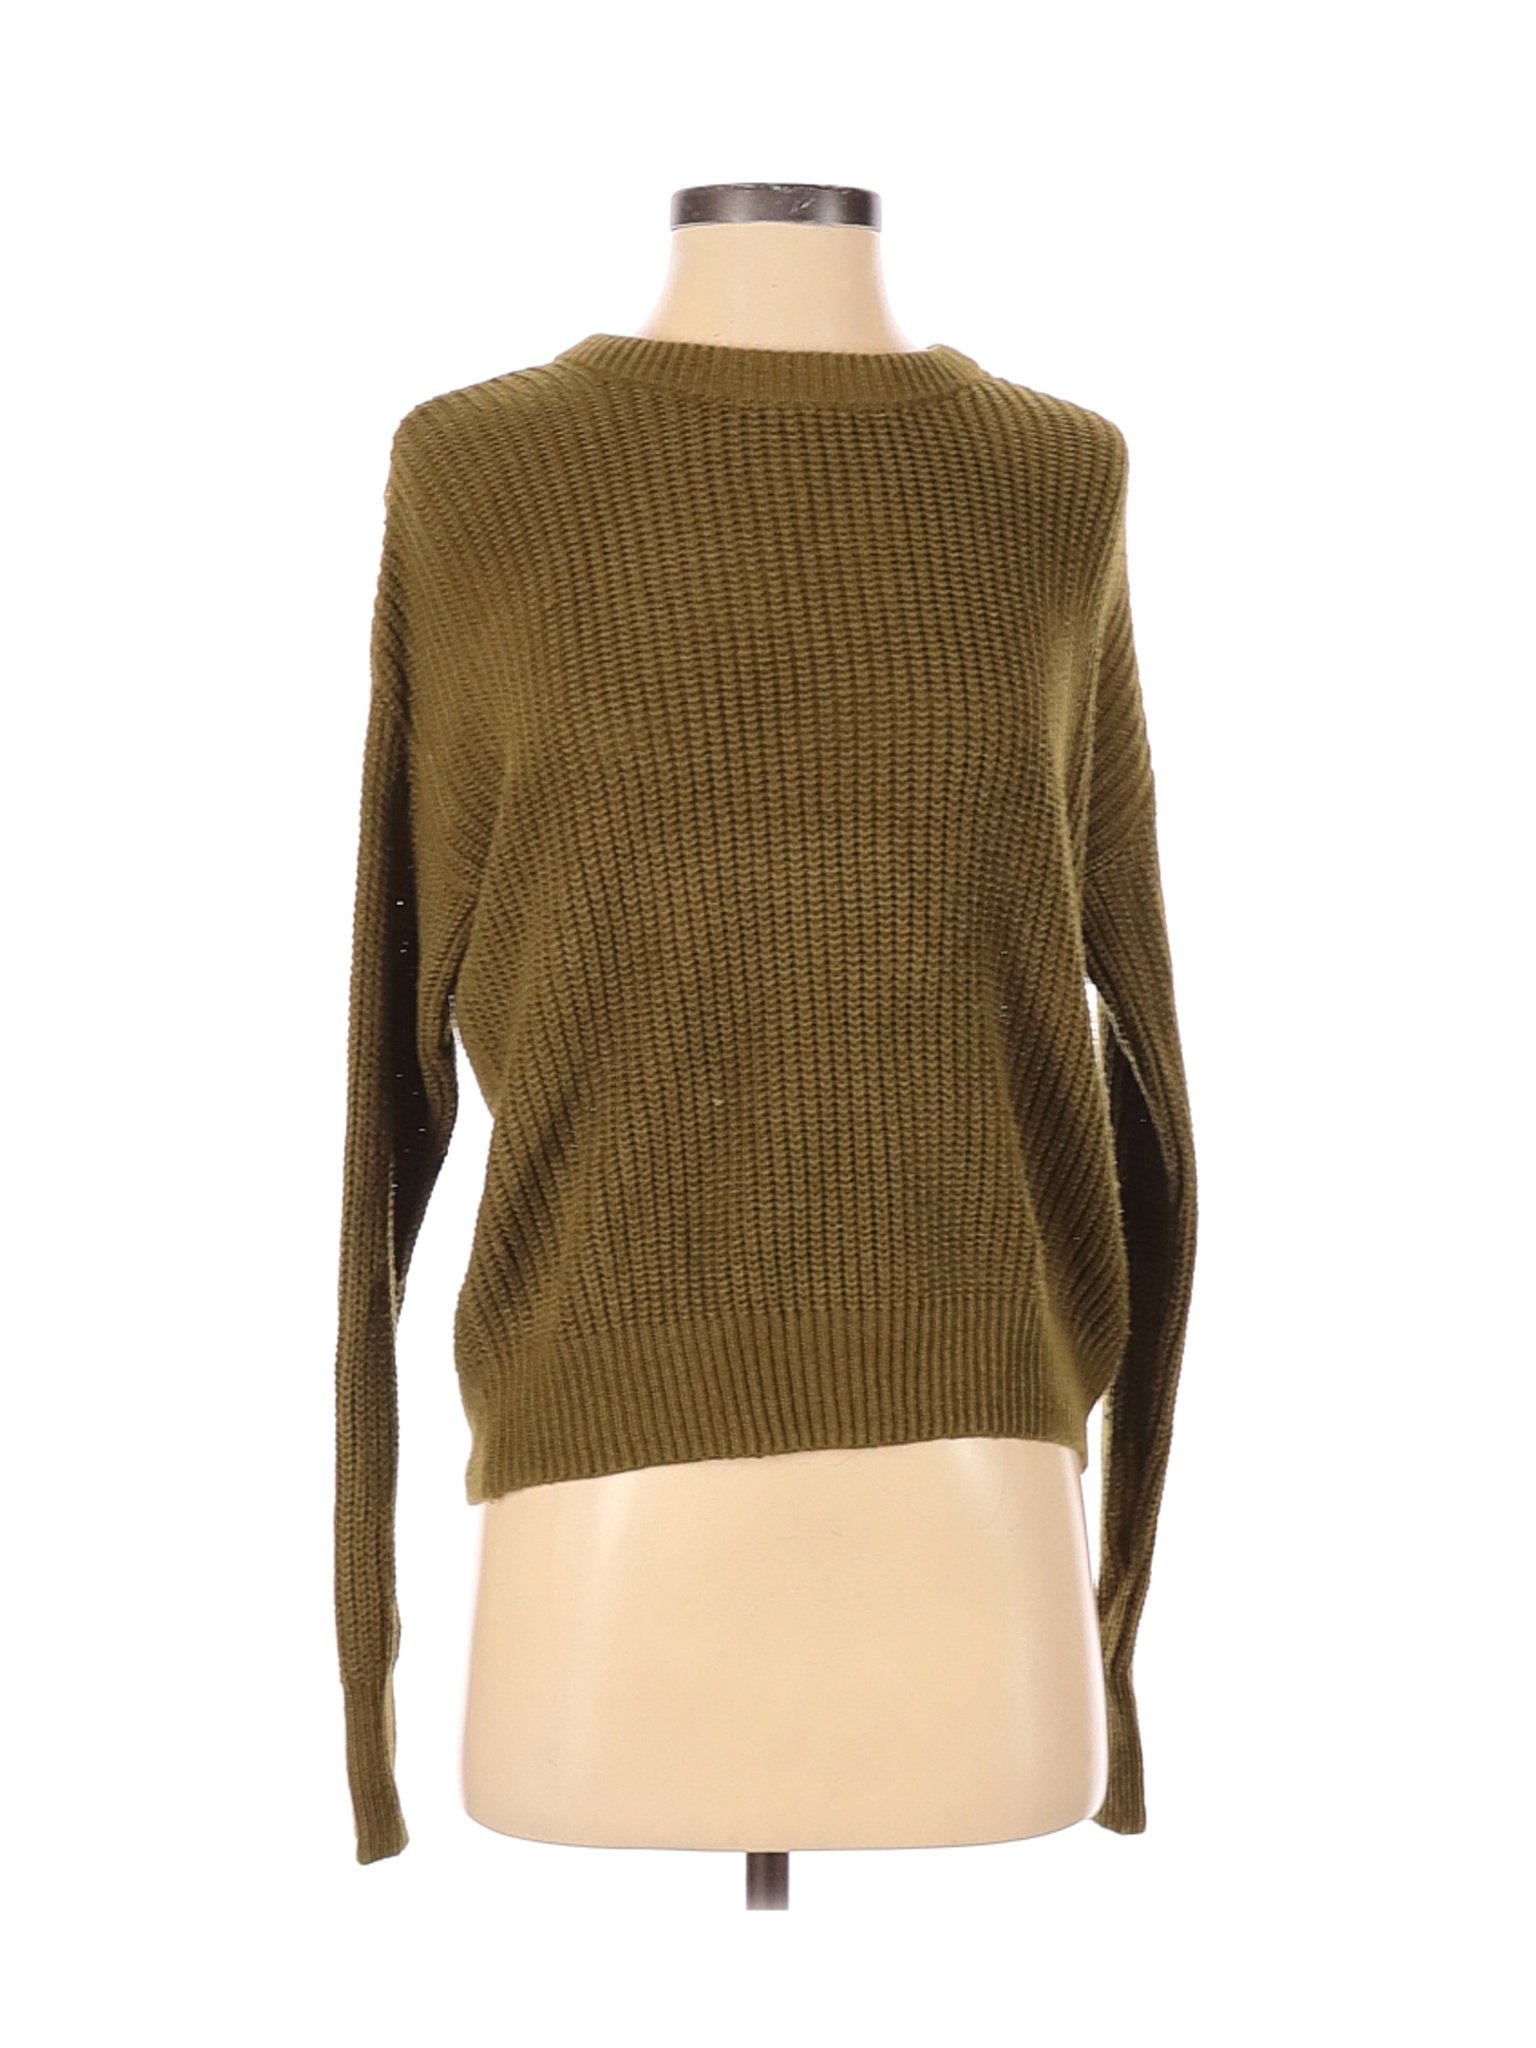 Urban Outfitters Women Green Pullover Sweater S | eBay